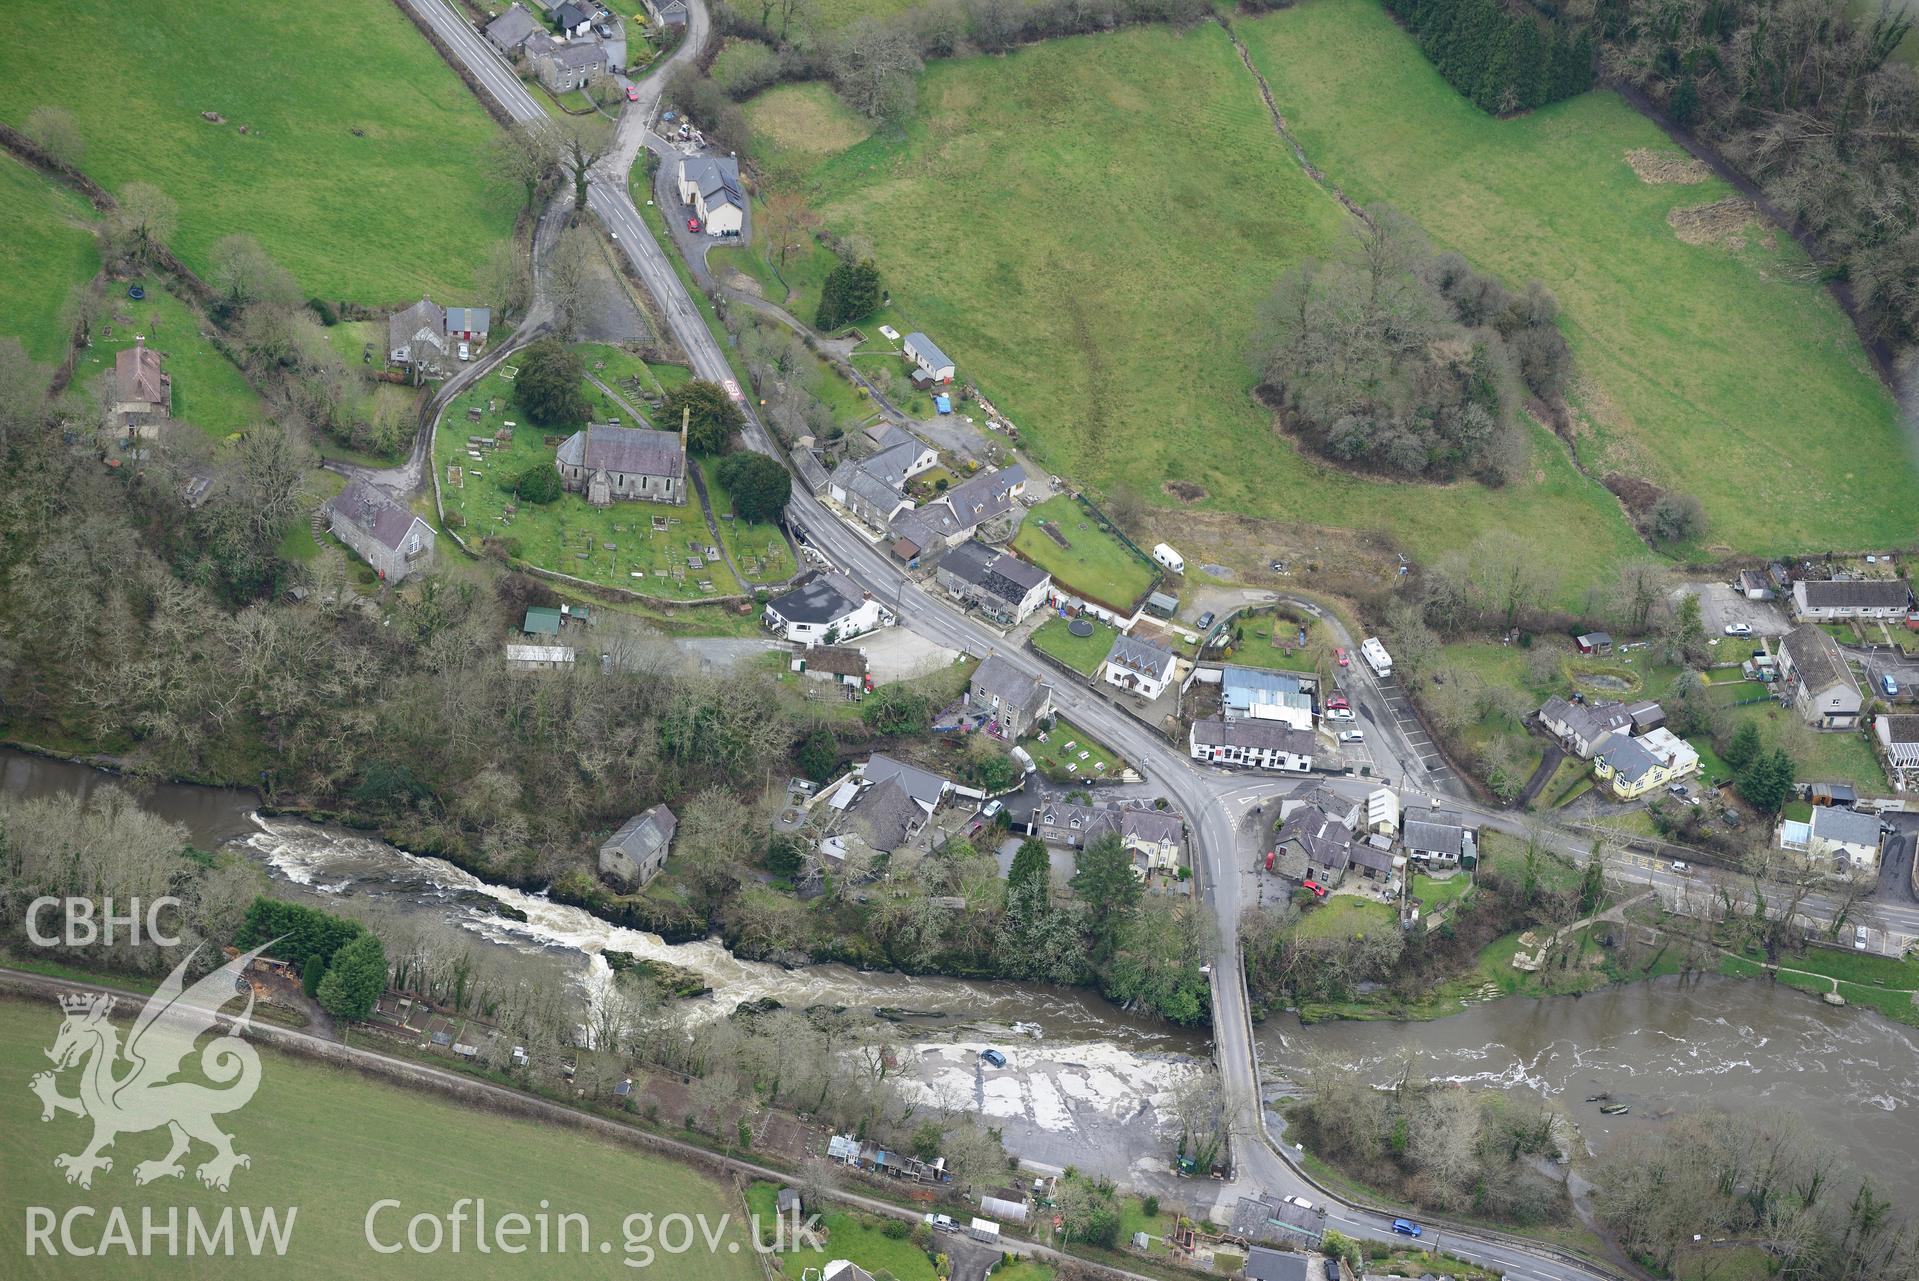 St. Llawddog's church, Parc-y-Dommen motte and Cenarth bridge, Cenarth. Oblique aerial photograph taken during the Royal Commission's programme of archaeological aerial reconnaissance by Toby Driver on 13th March 2015.